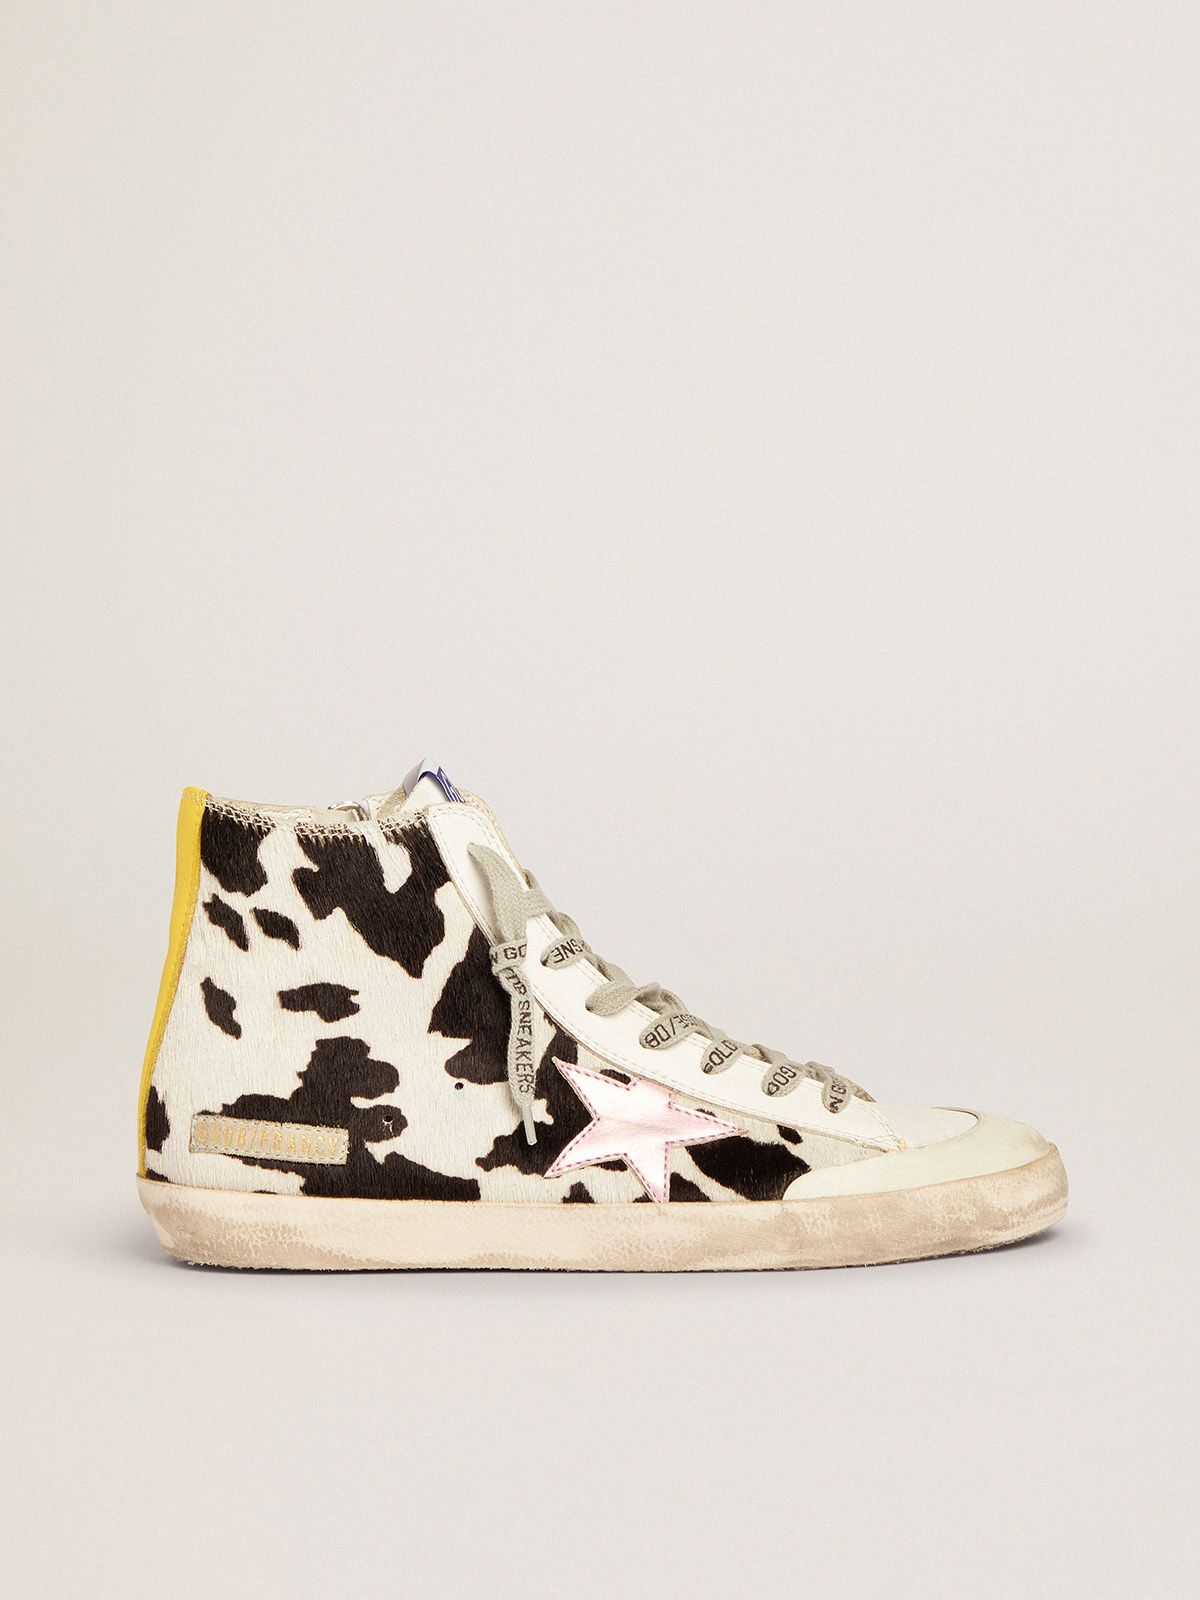 Golden Goose Uomo Saldi Francy Penstar sneakers in cow-print pony skin with pink laminated leather star